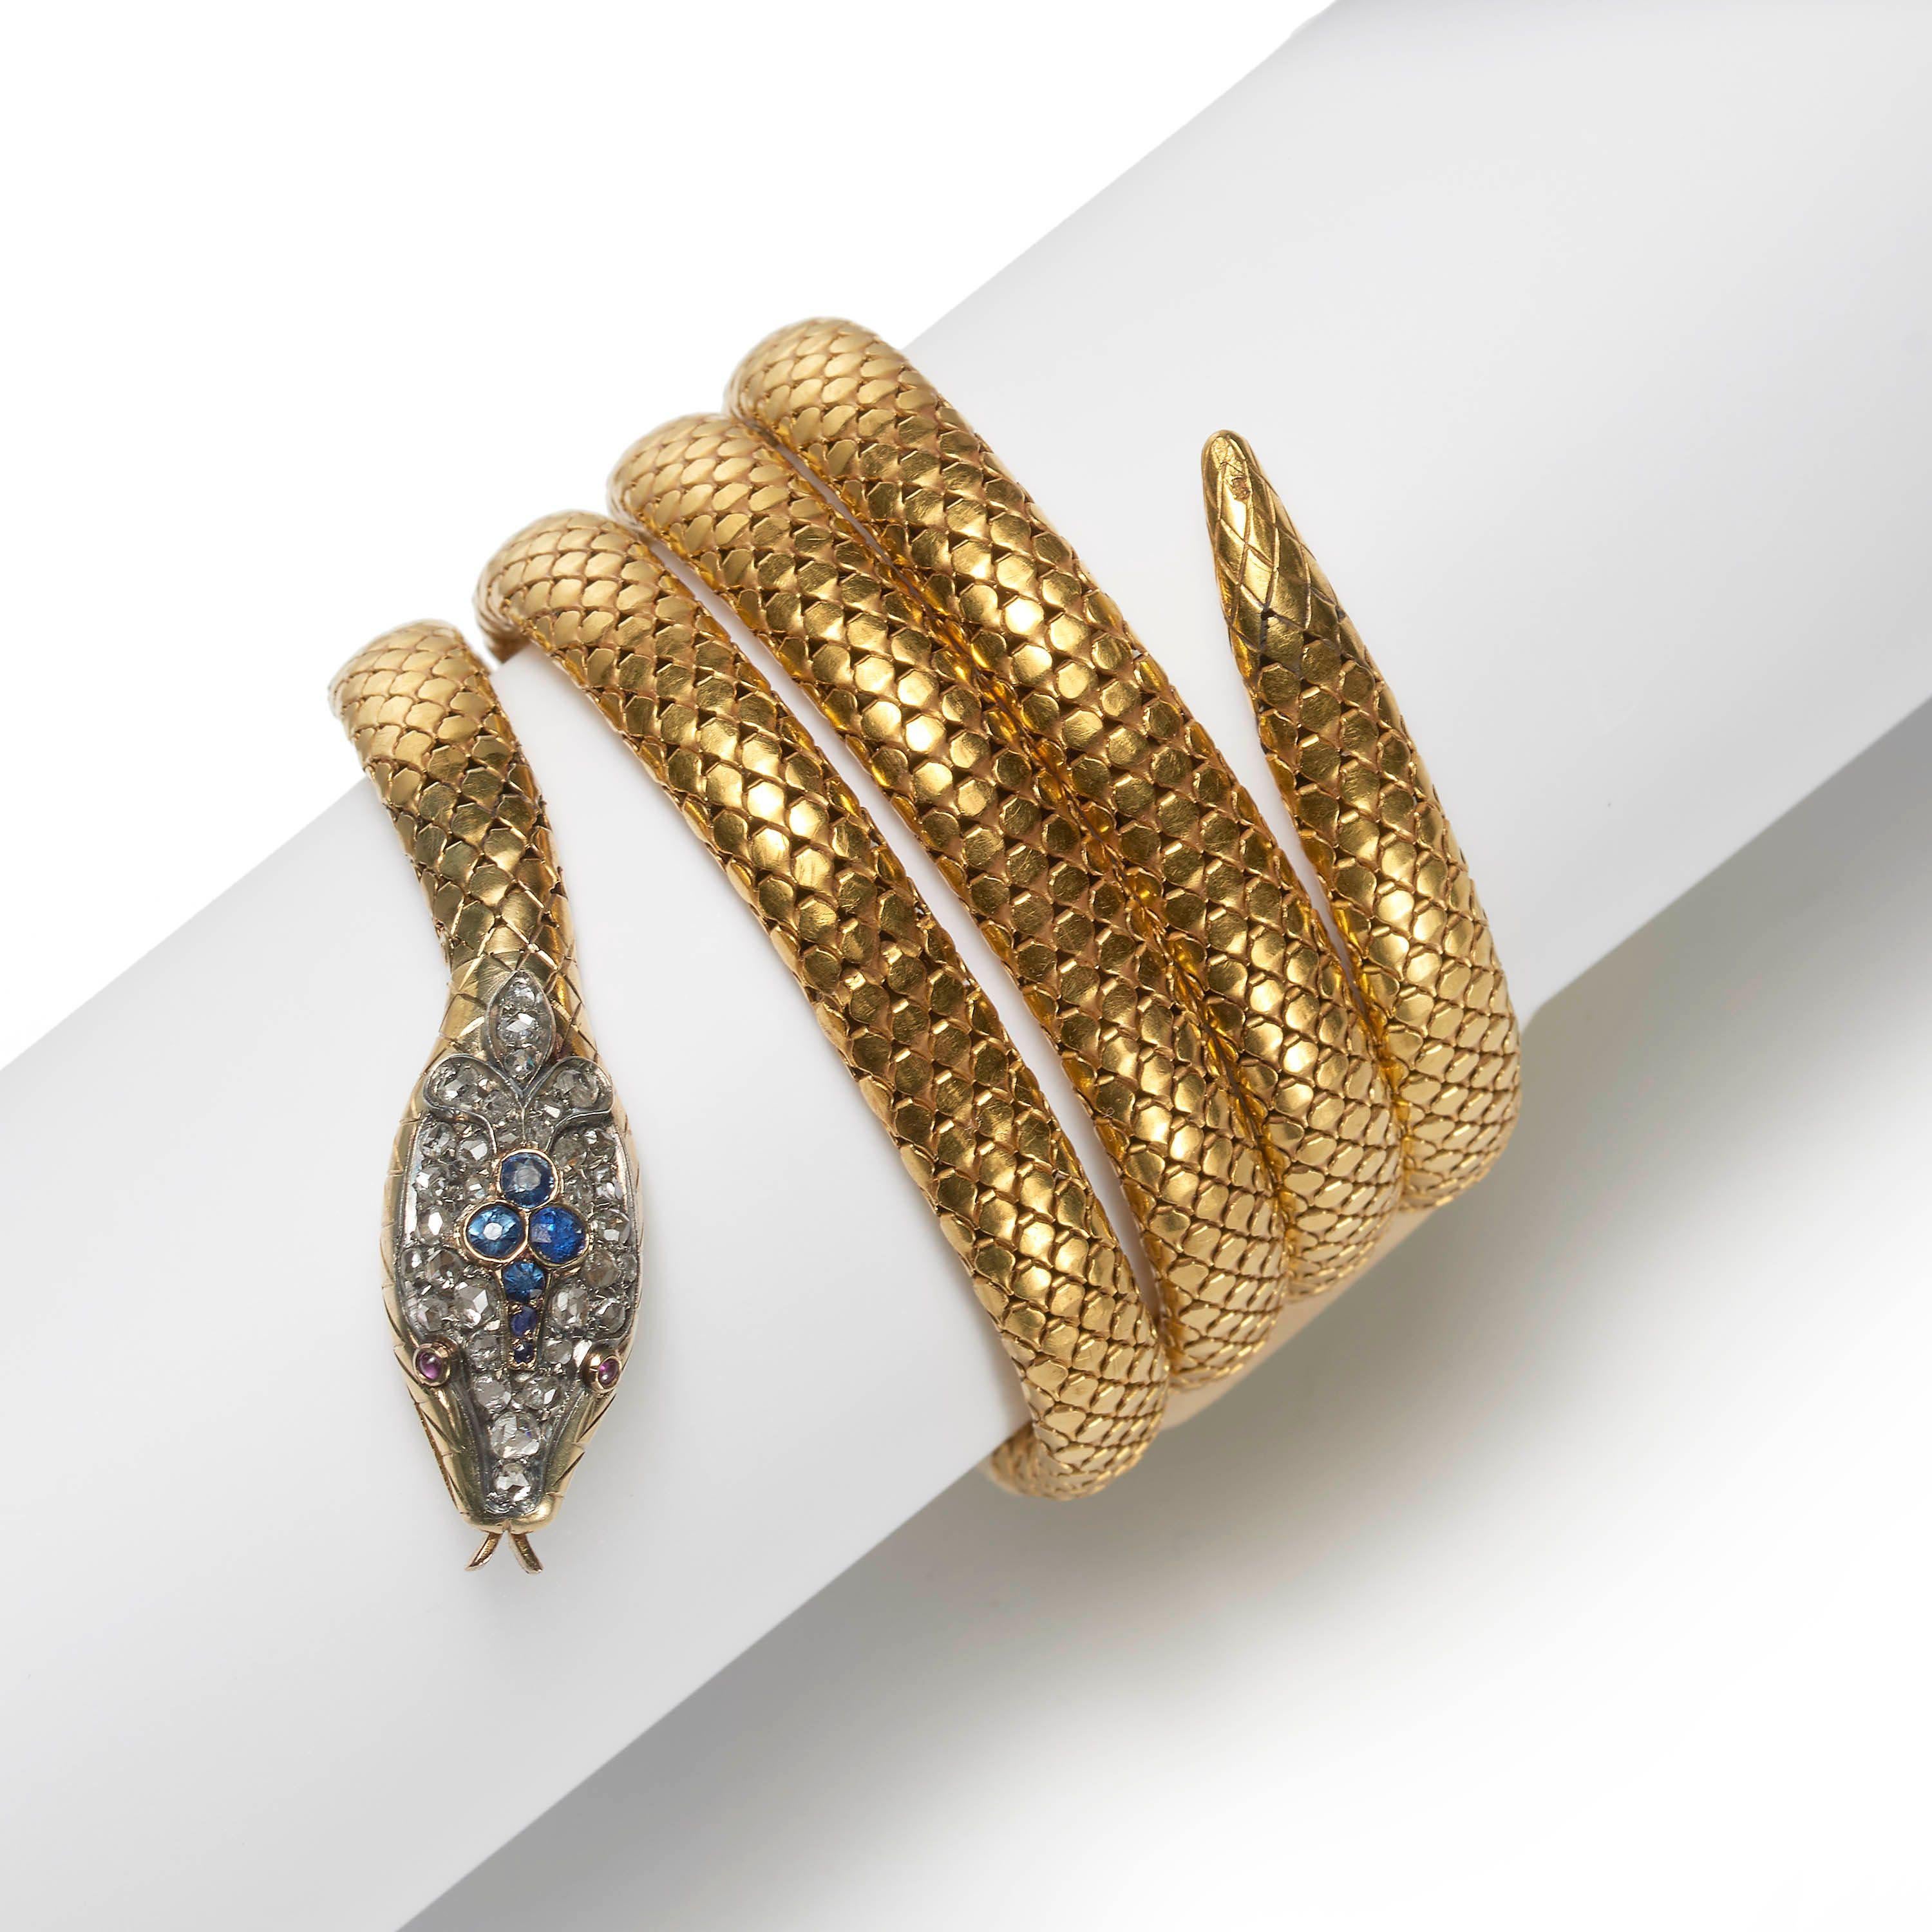 An antique gold bracelet modelled as a snake, in the form of four coils of gold flexible links, representing scales. The tail and head are engraved, with faceted sapphires, surrounded by pavé set rose-cut diamonds, set in the head, cabochon-cut ruby